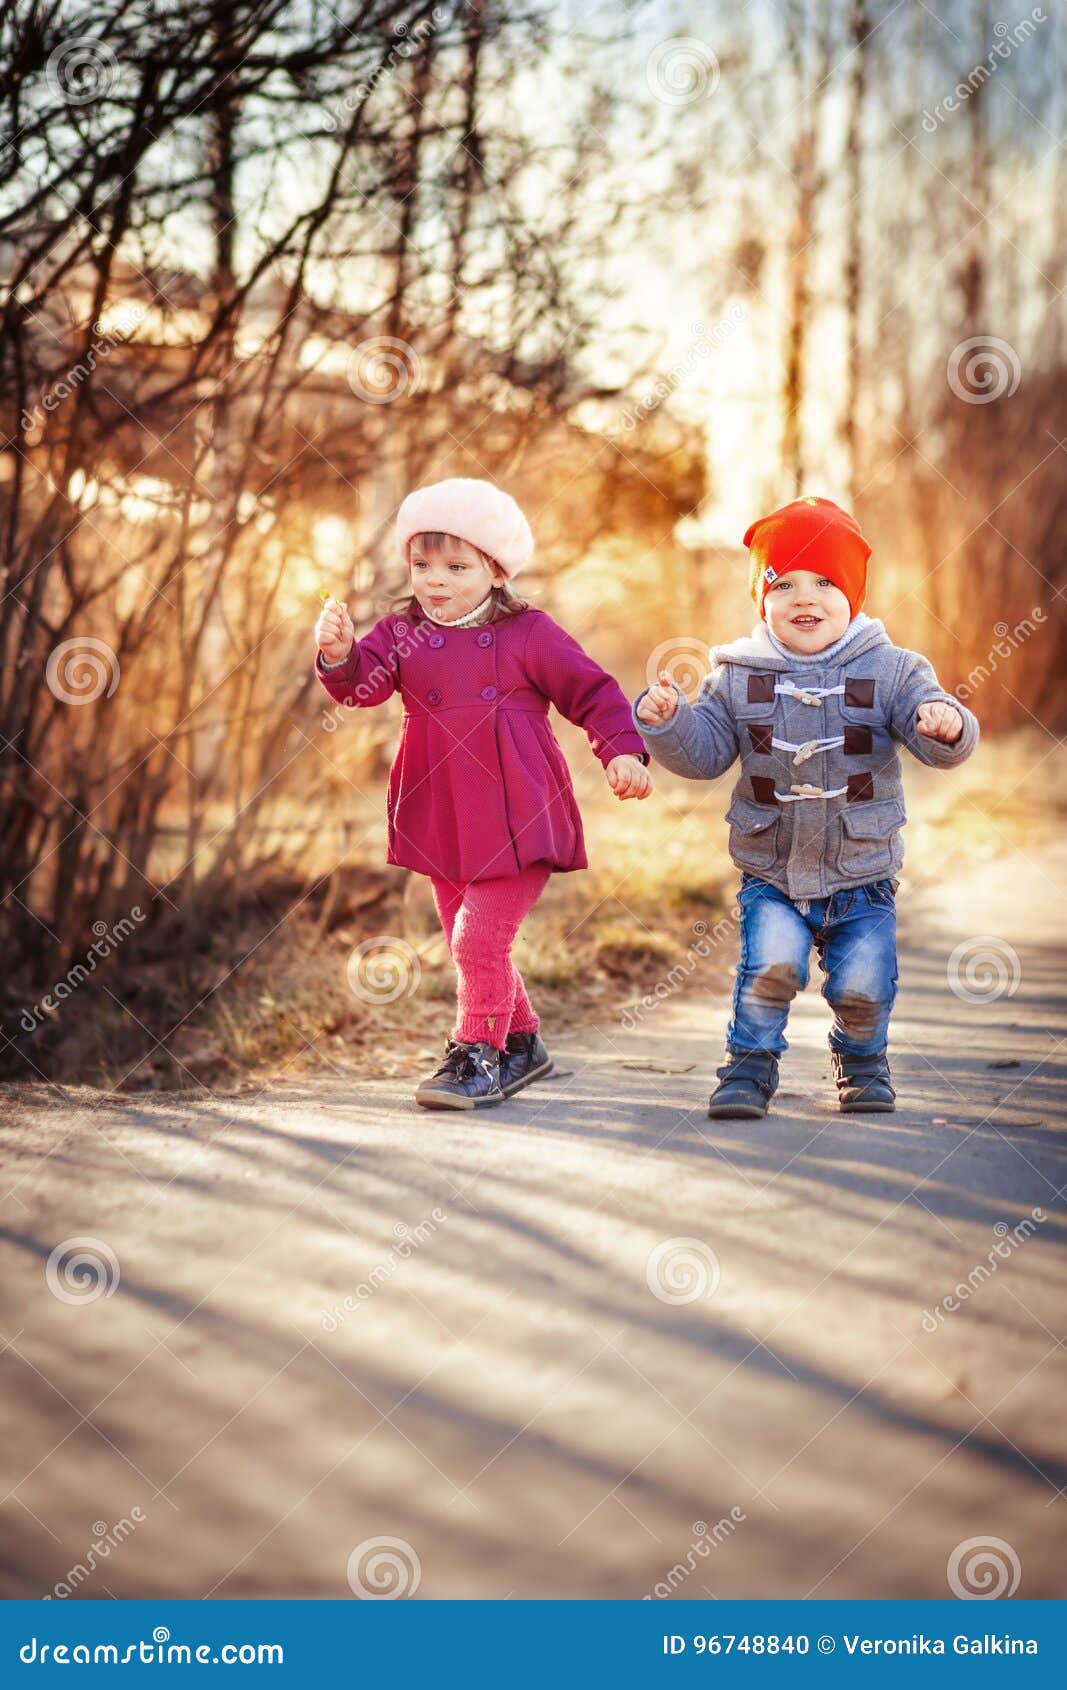 3 349 Cute Twins Boy Girl Photos Free Royalty Free Stock Photos From Dreamstime